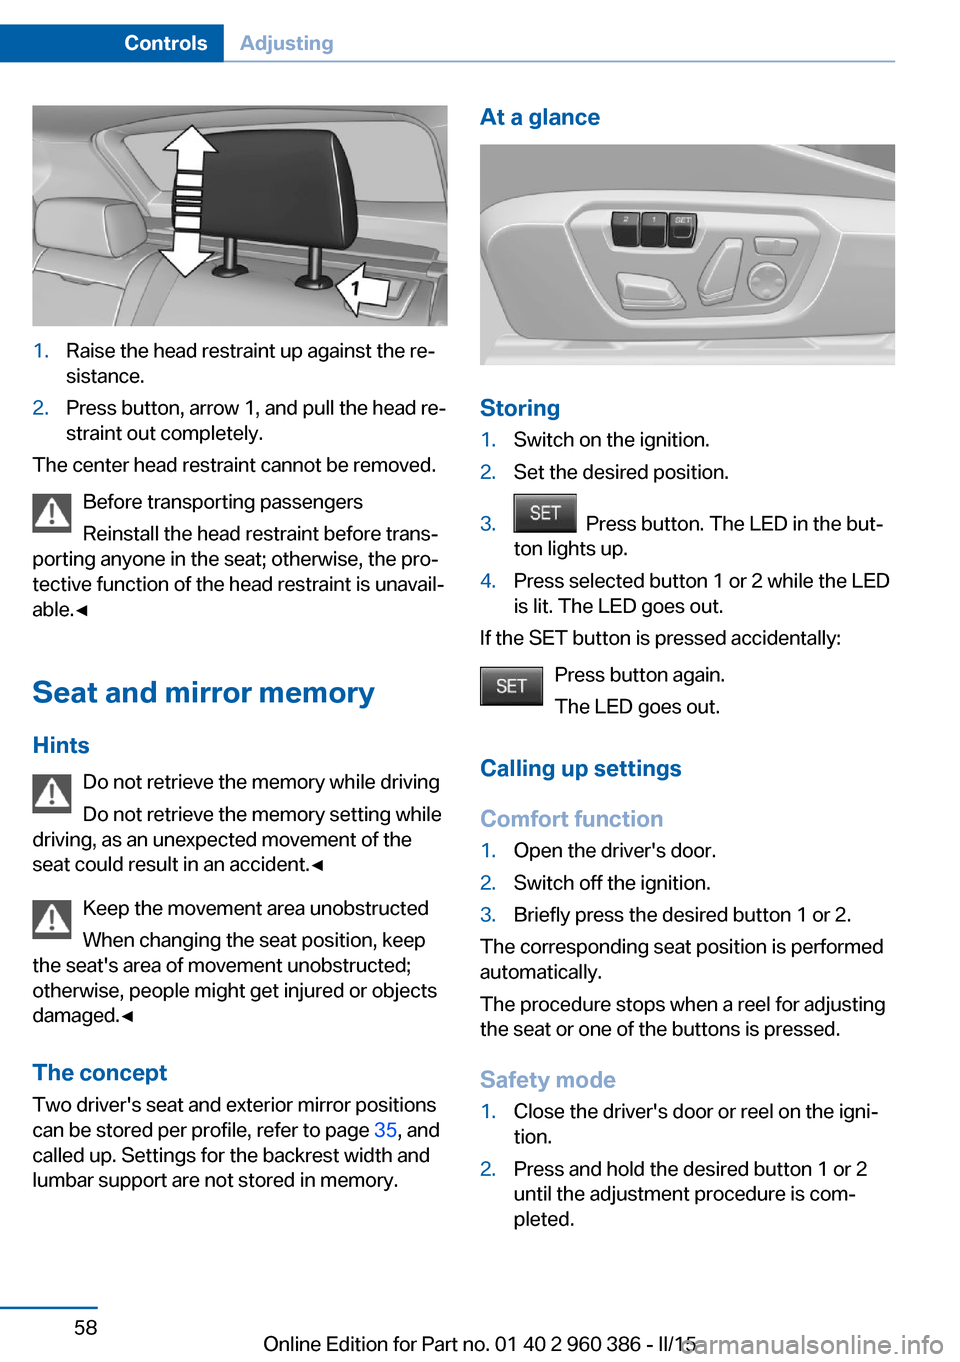 BMW X3 2015 F25 User Guide 1.Raise the head restraint up against the re‐
sistance.2.Press button, arrow 1, and pull the head re‐
straint out completely.
The center head restraint cannot be removed.
Before transporting passe